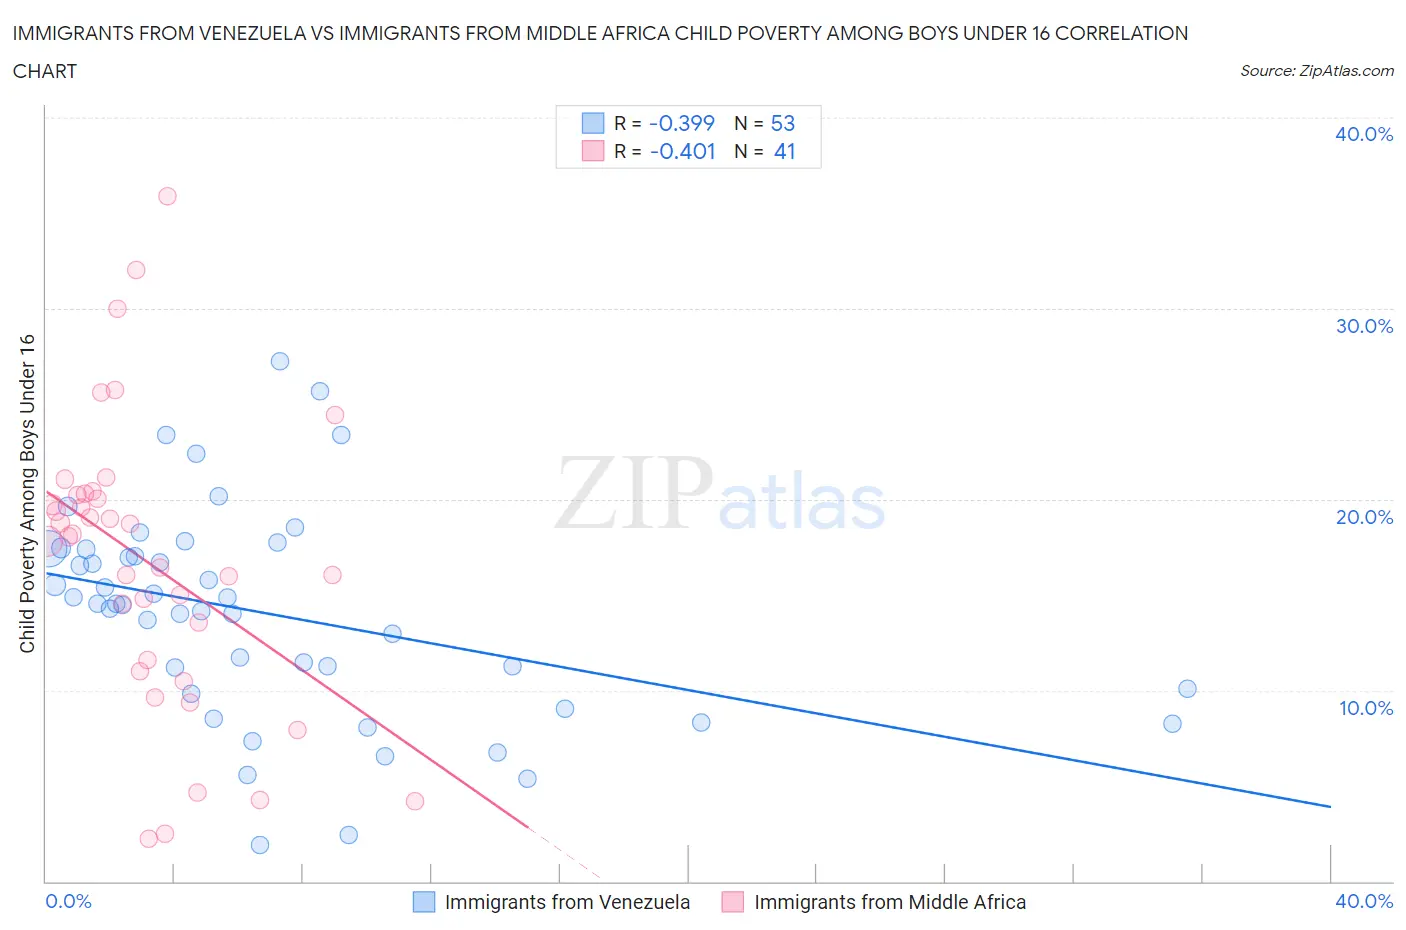 Immigrants from Venezuela vs Immigrants from Middle Africa Child Poverty Among Boys Under 16